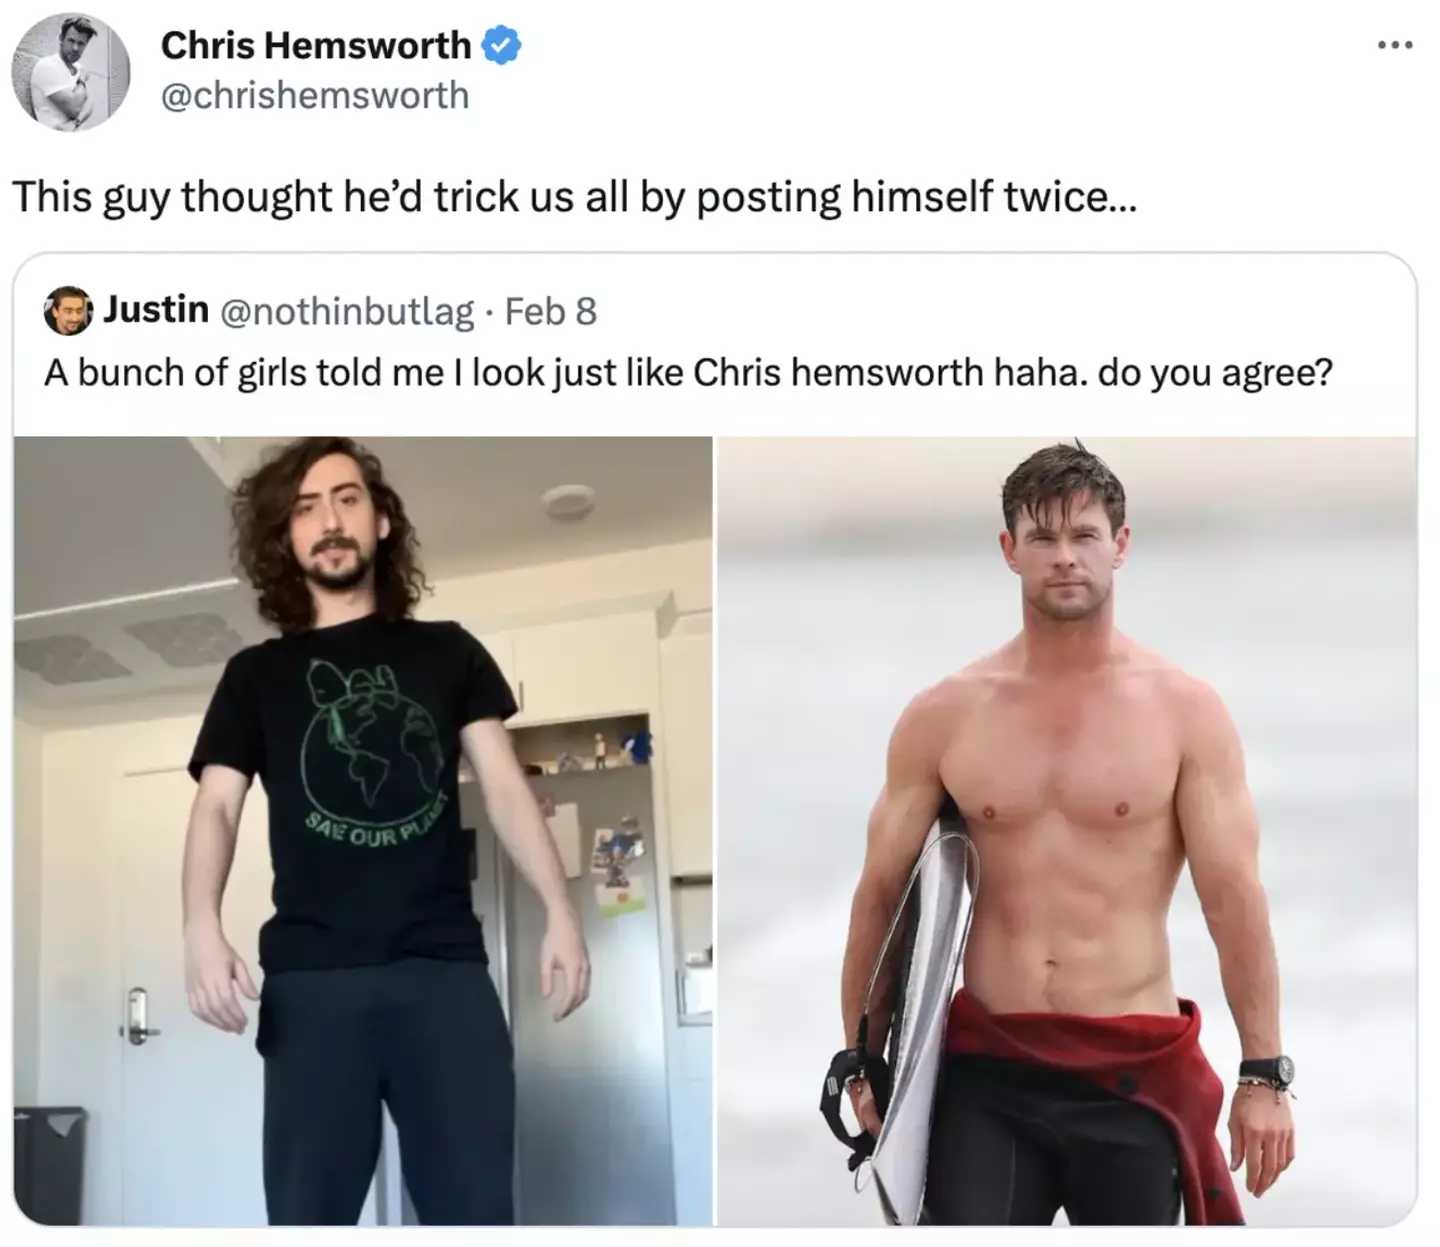 Hemsworth was probably the last person Justin expected to reply.